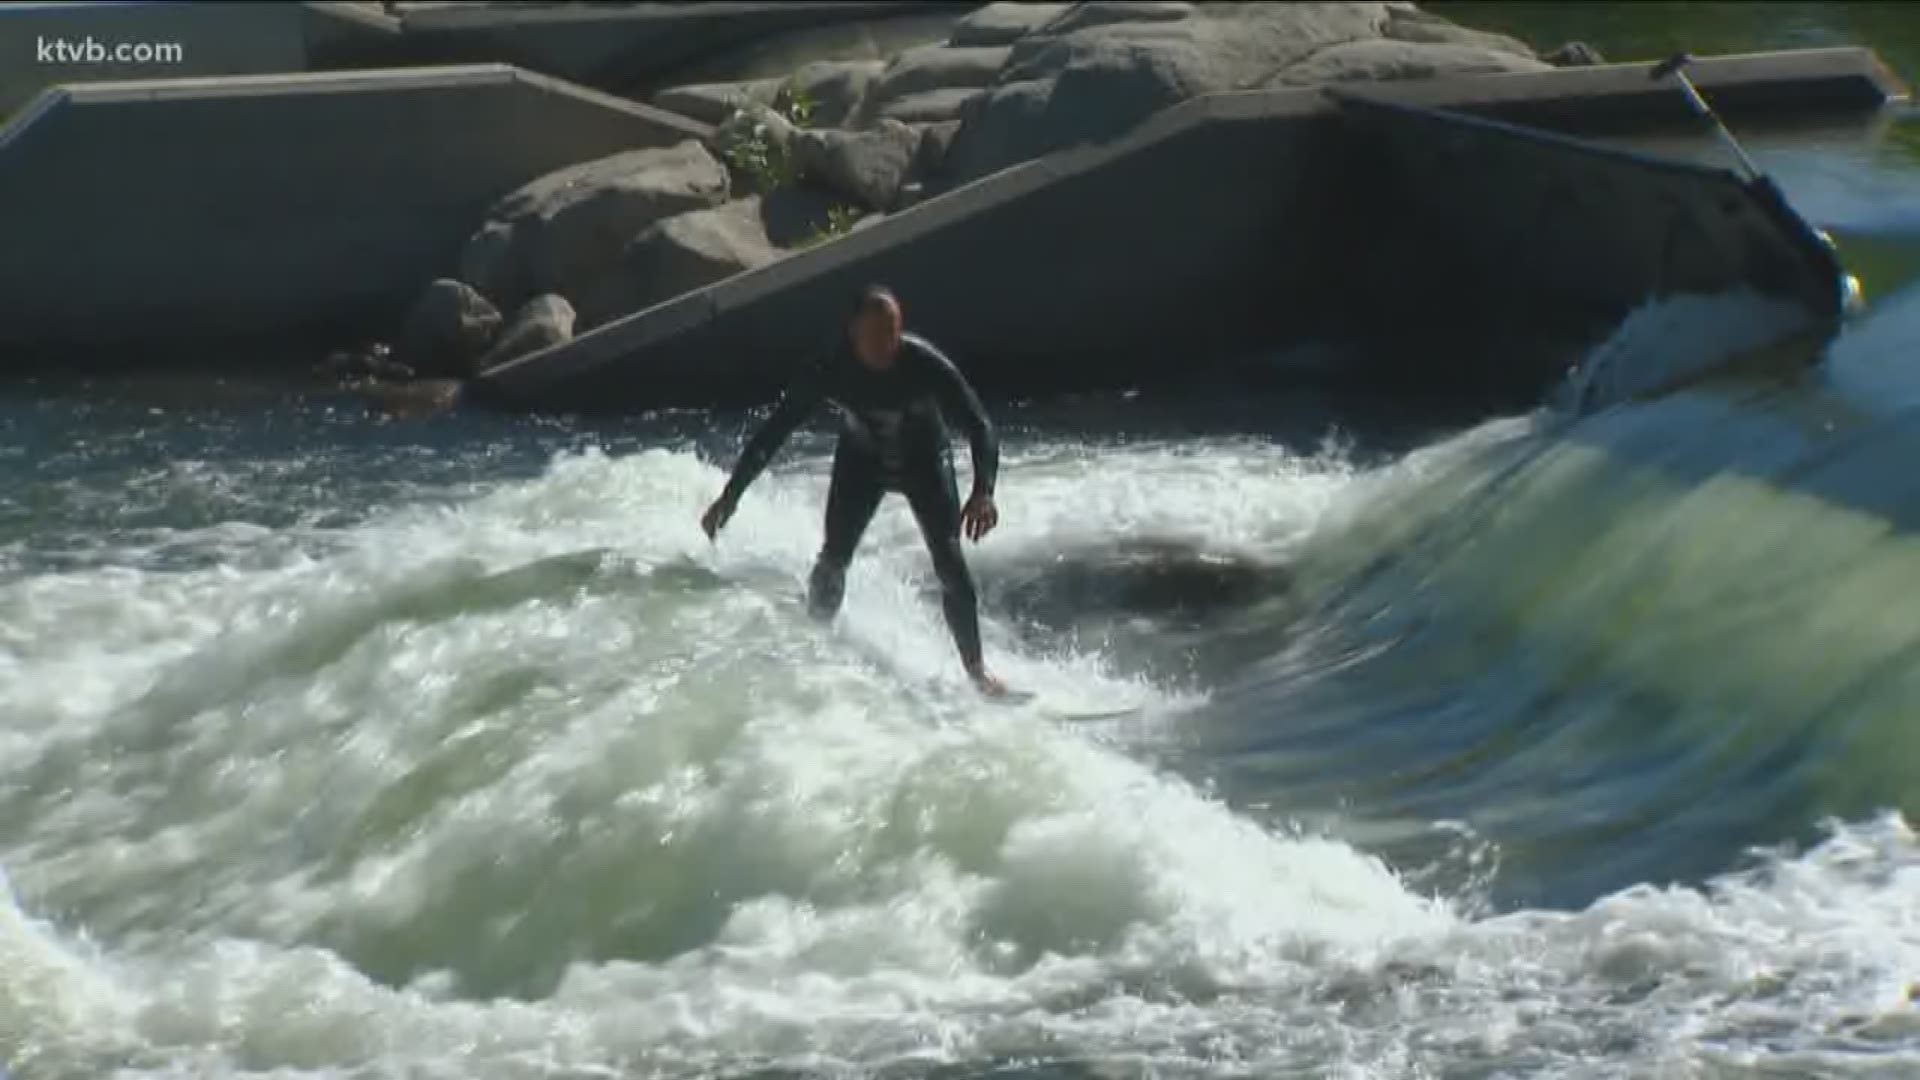 The wave is part of phase 2 of the Boise Whitewater Park.